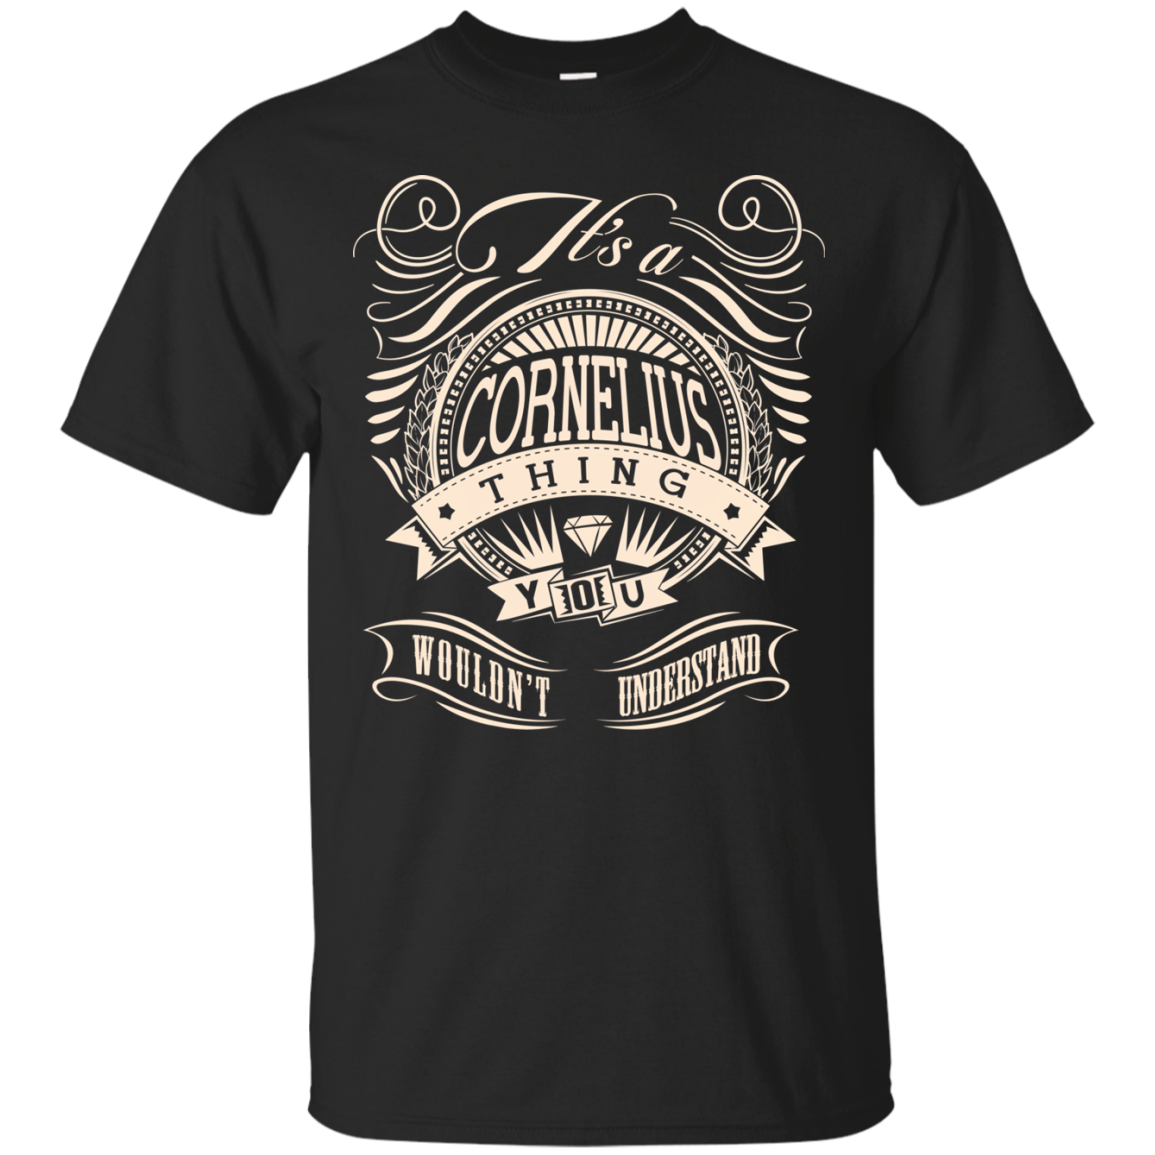 Cornelius Shirts It's A Cornelius Thing You Wouldn't Understand Shirt ...